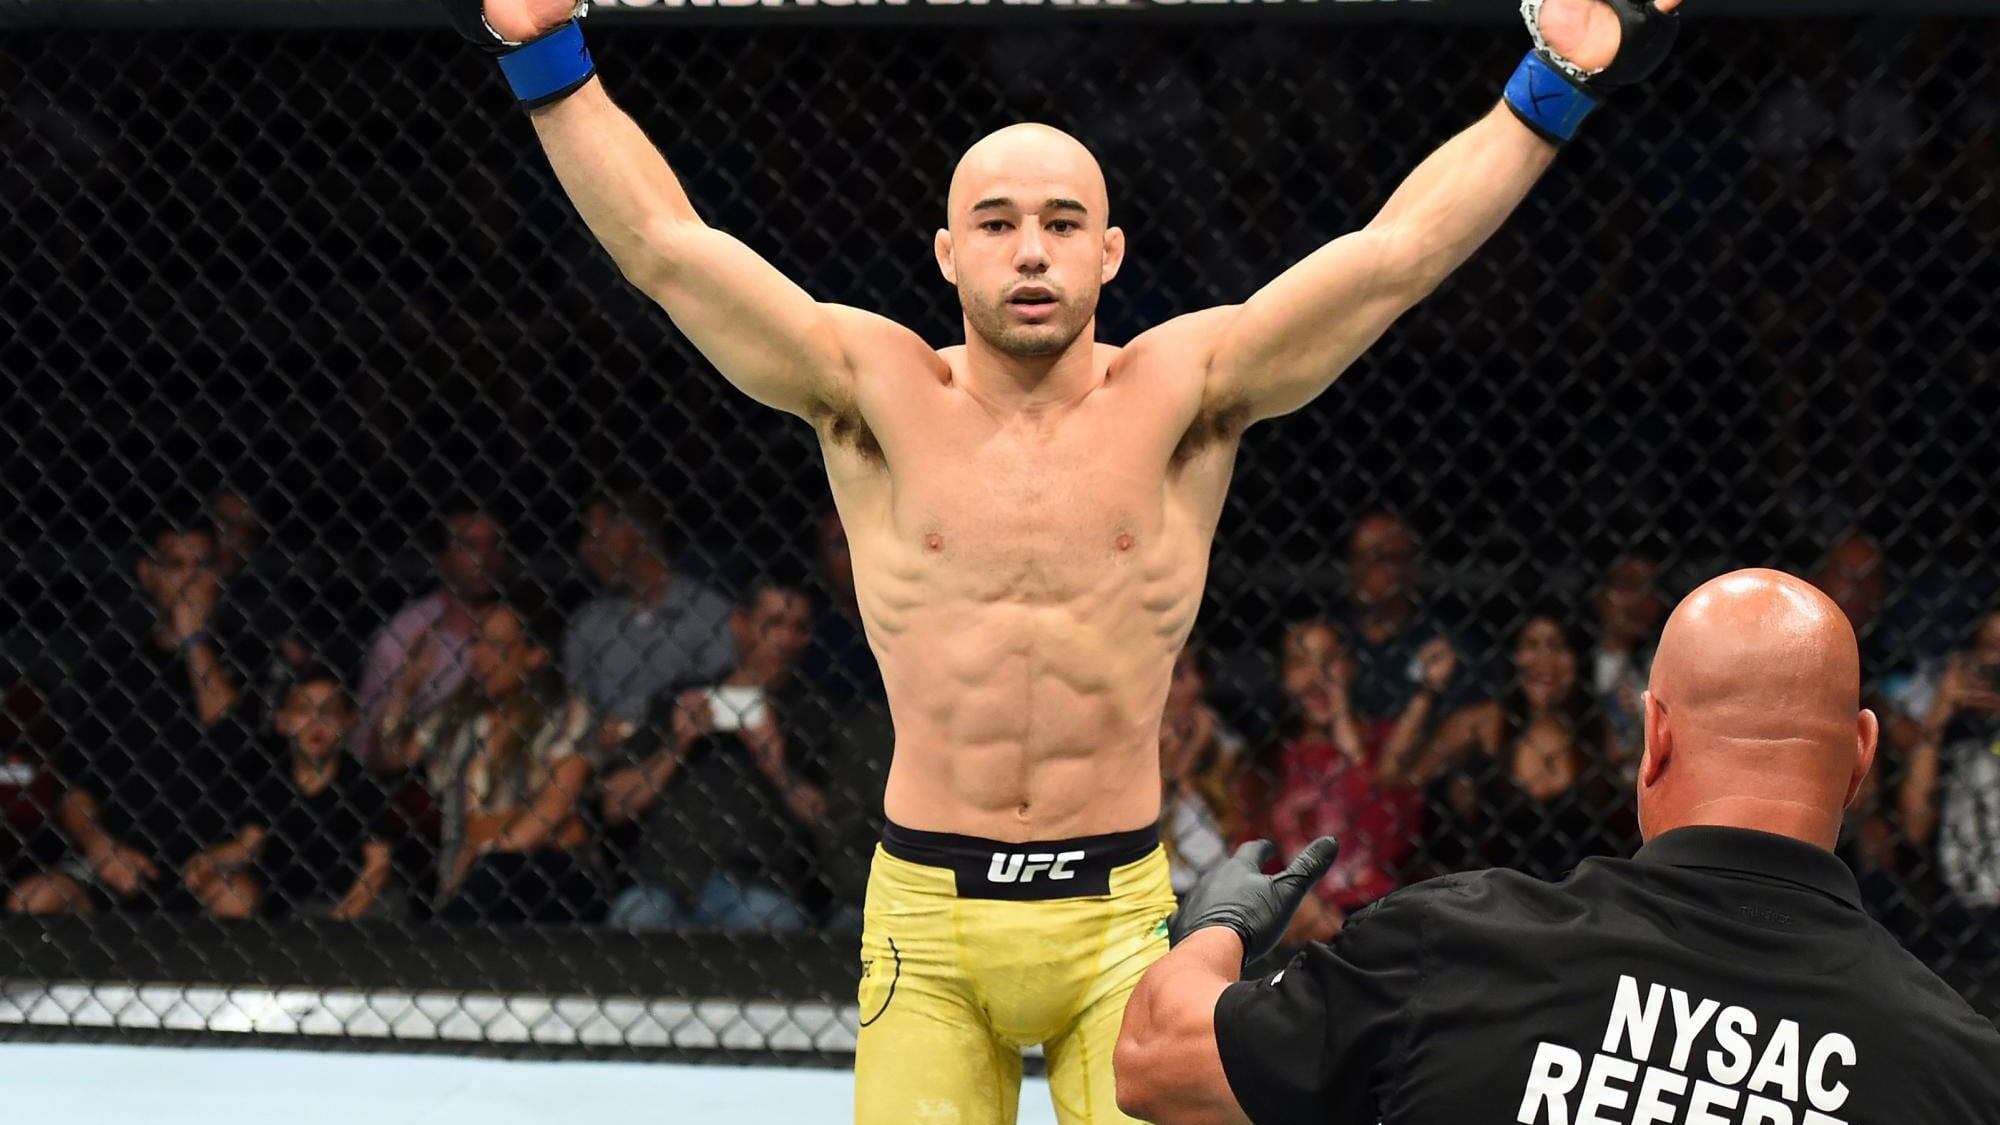 Marlon Luiz Moraes (born April 26, 1988) is a Brazilian mixed martial artist who competes in the bantamweight division of the Ultimate Fighting Champi...